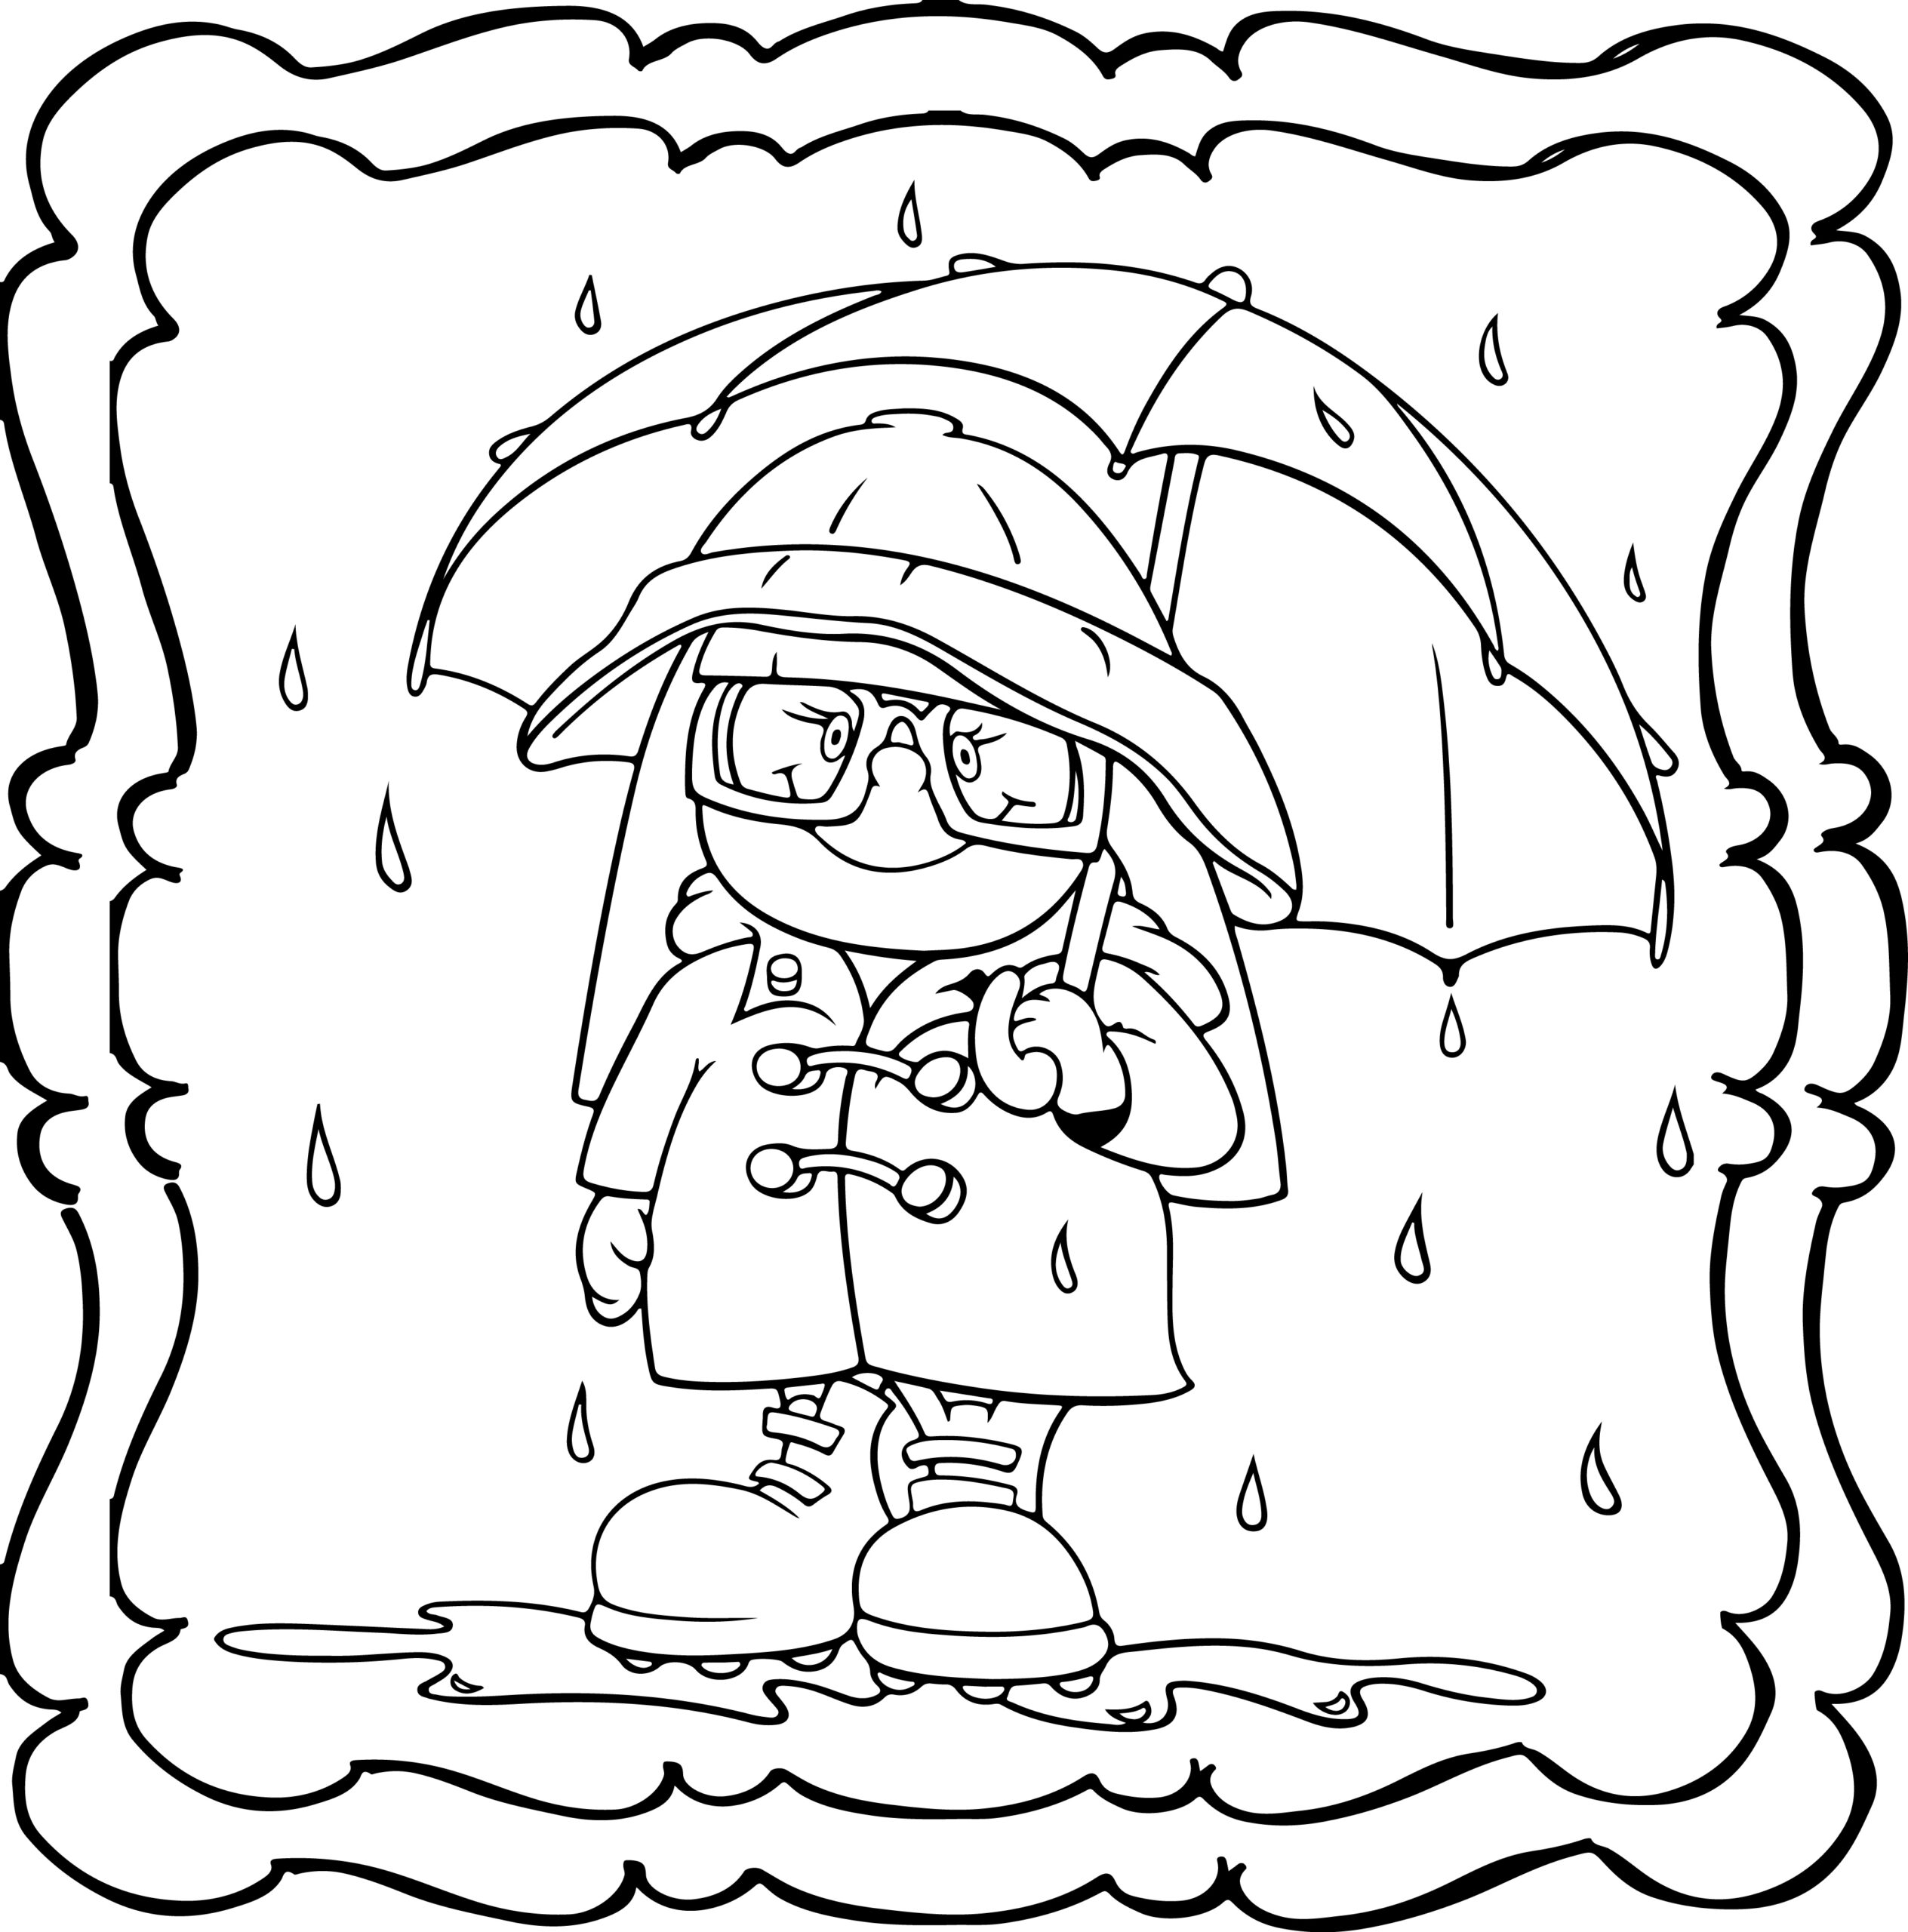 Rain coloring book easy and fun rain coloring book for kids made by teachers